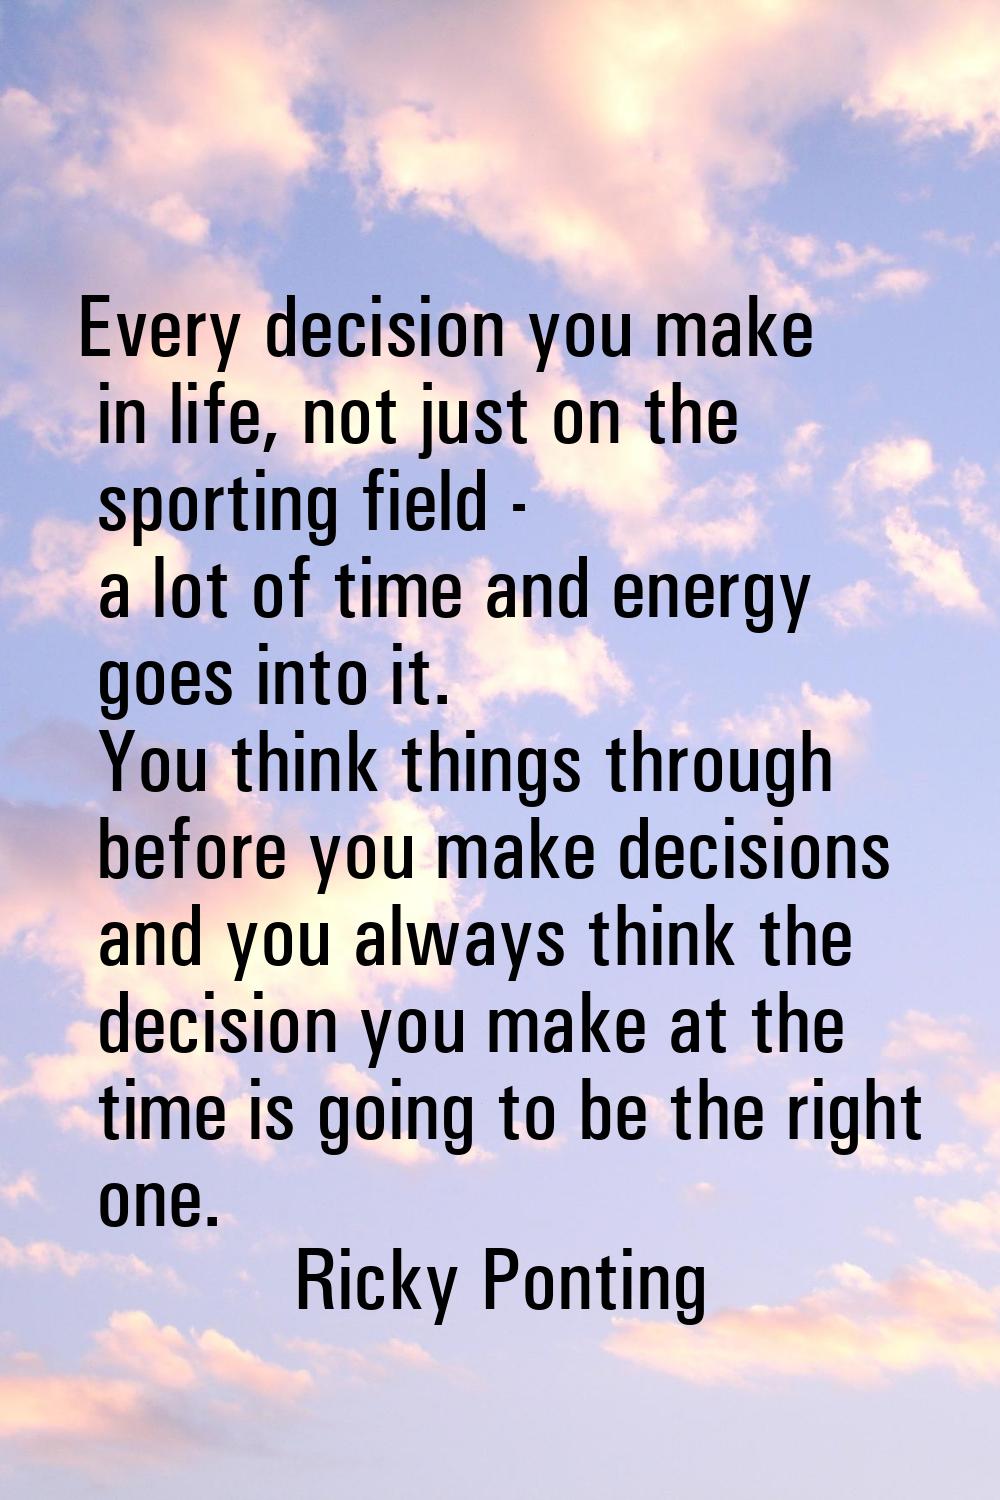 Every decision you make in life, not just on the sporting field - a lot of time and energy goes int